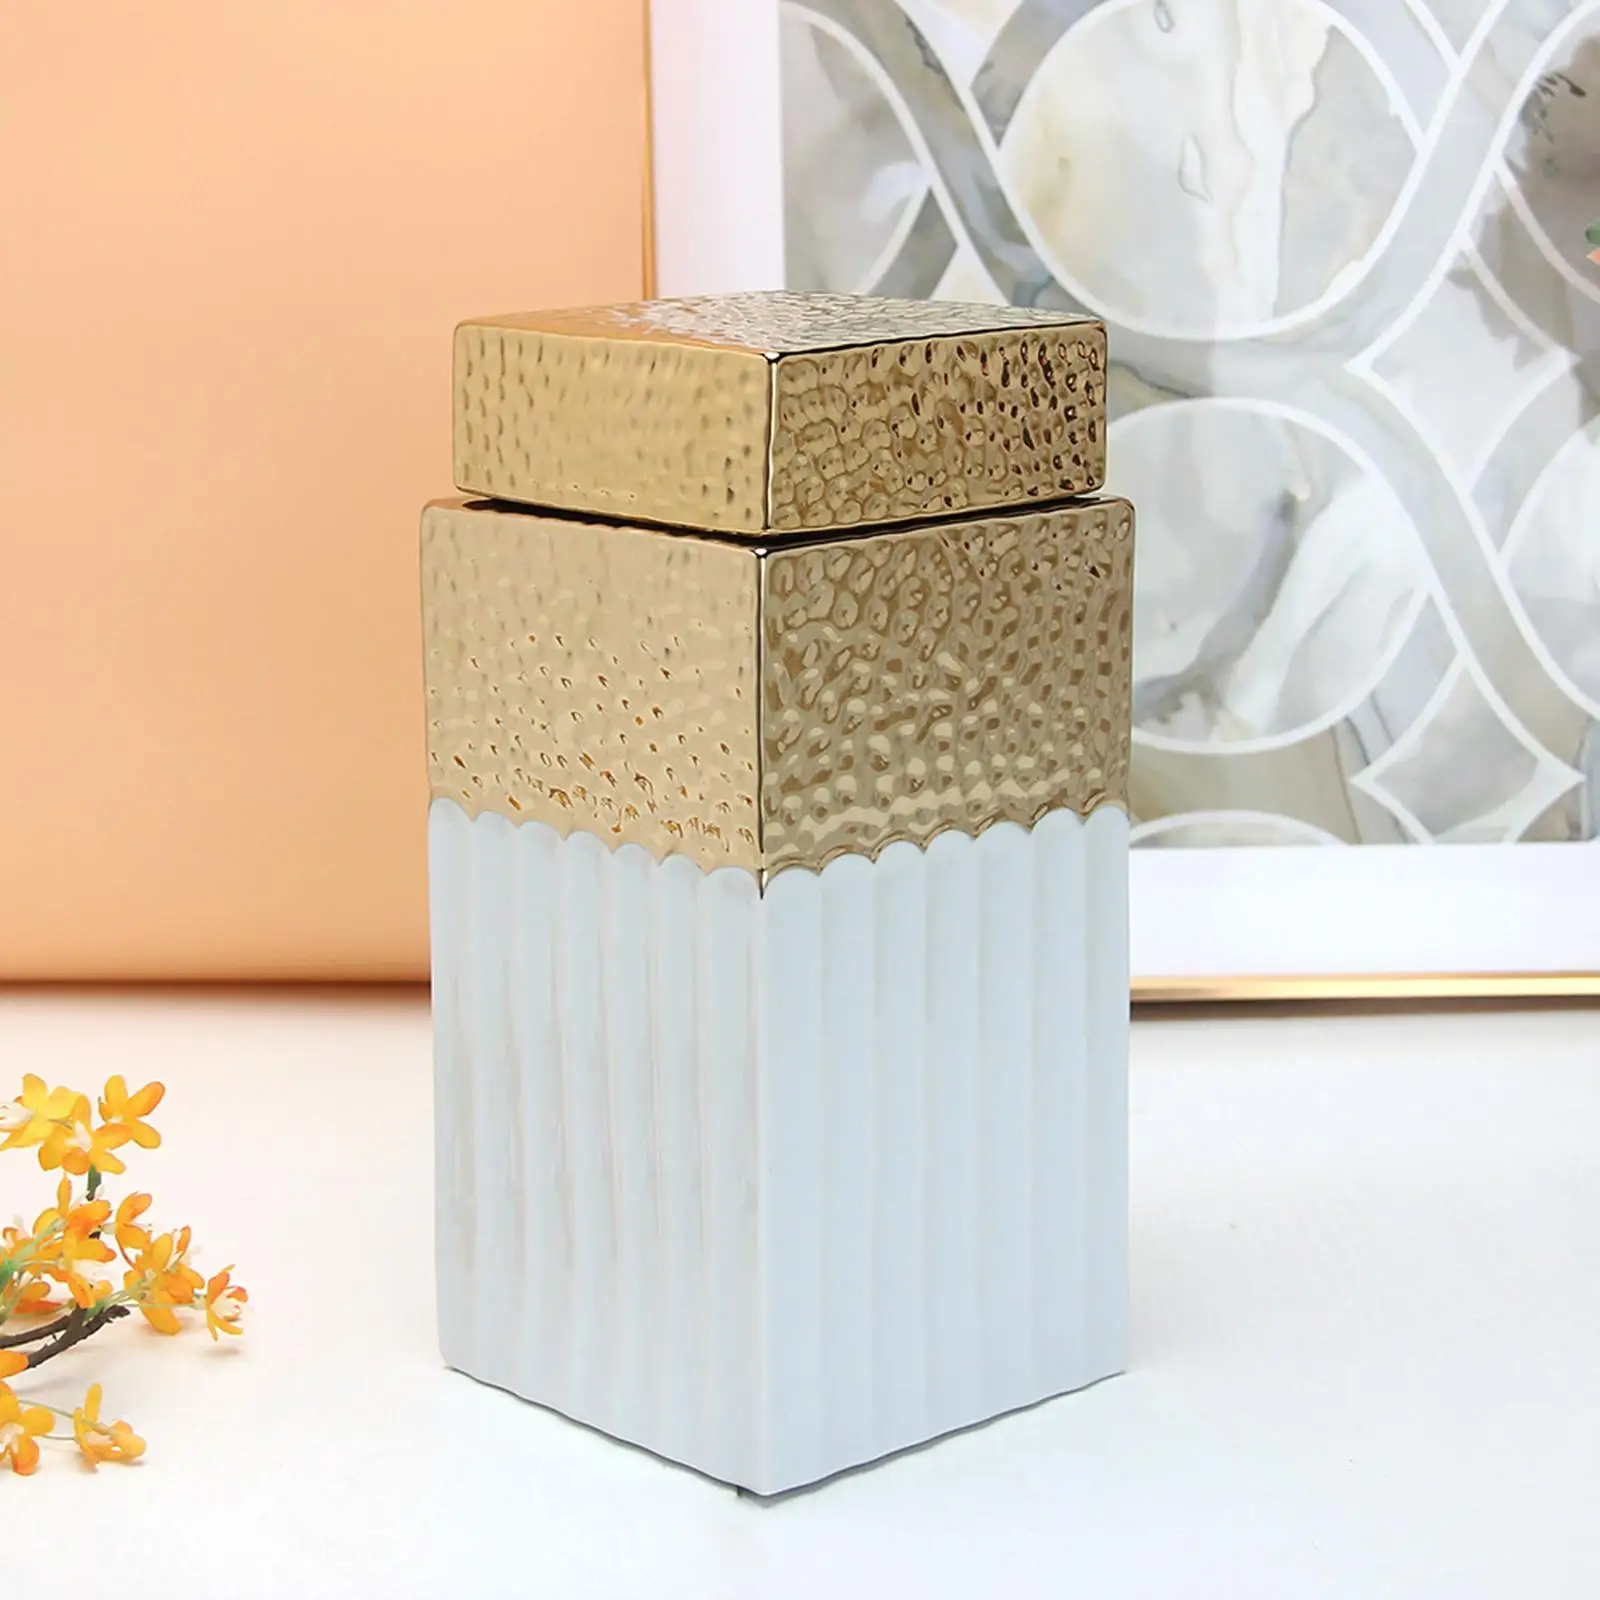 Modern Flower Vase with Airtight Lid Coffee Sugar Tea Storage Collection Ceramic Canister for Wedding Home Table Decor